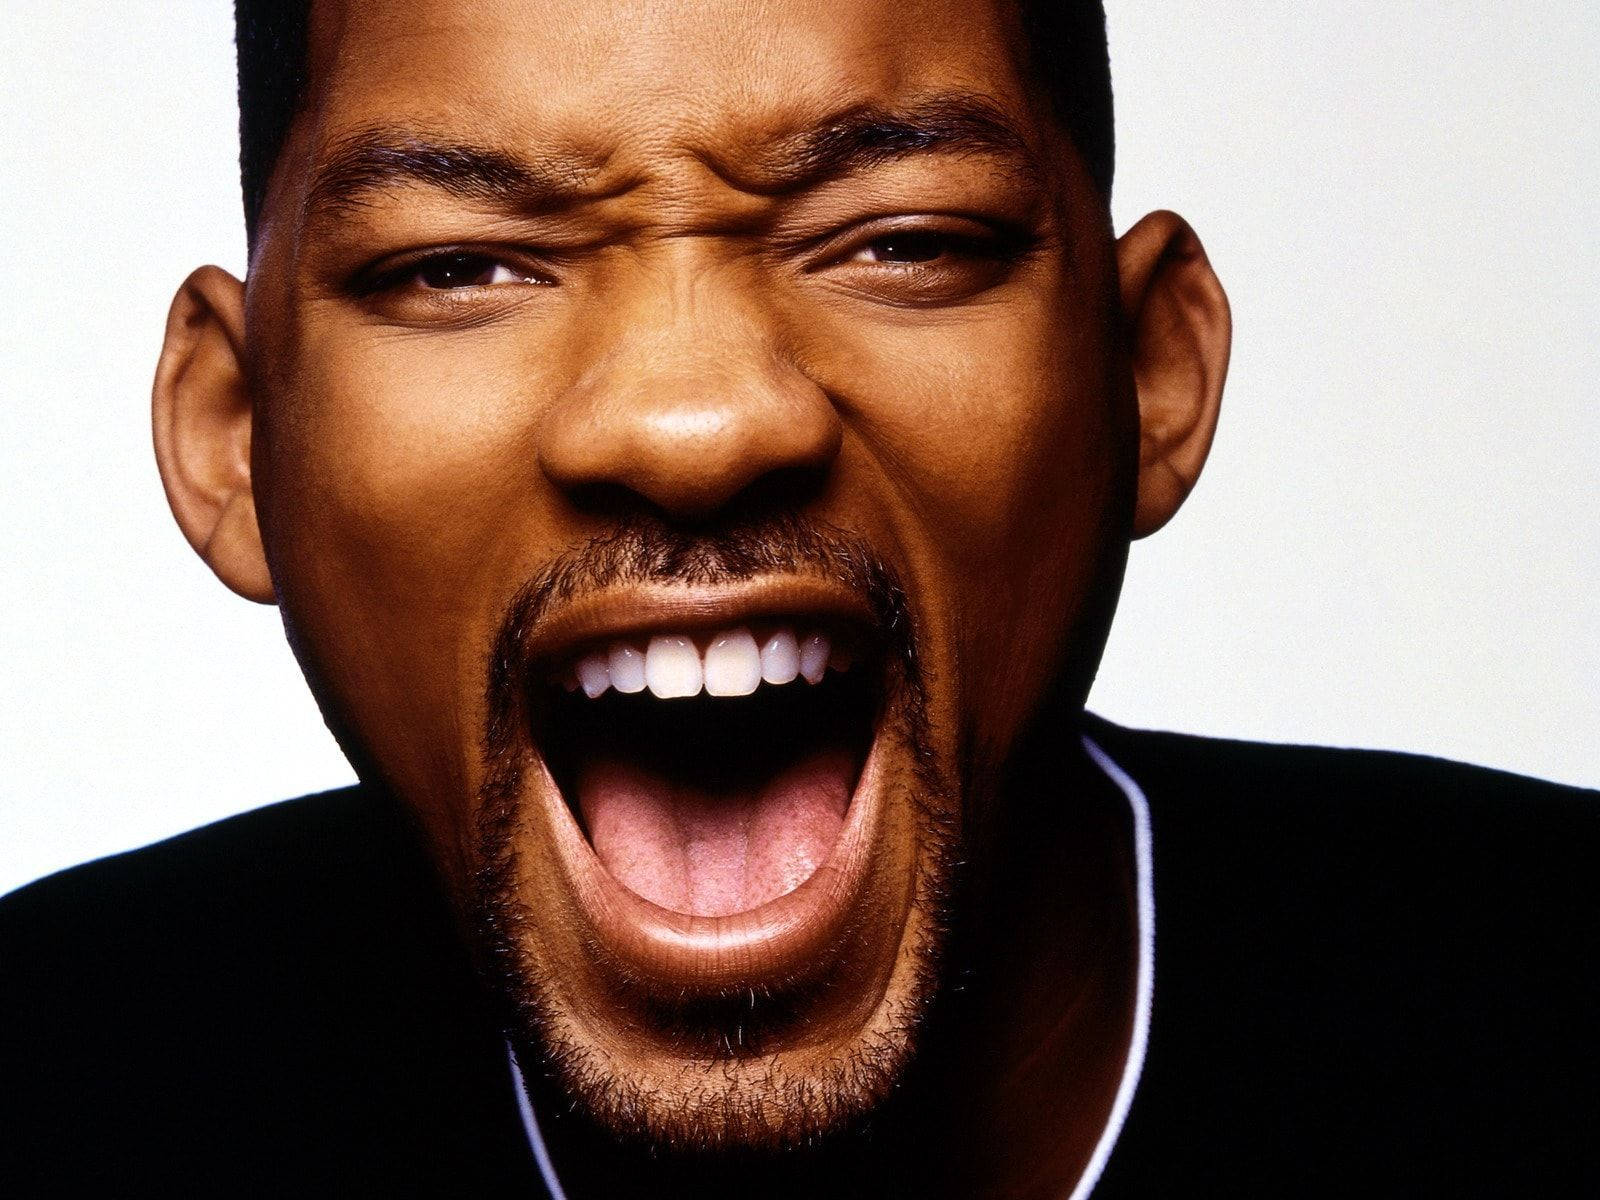 Will Smith Candid Shot Wallpaper